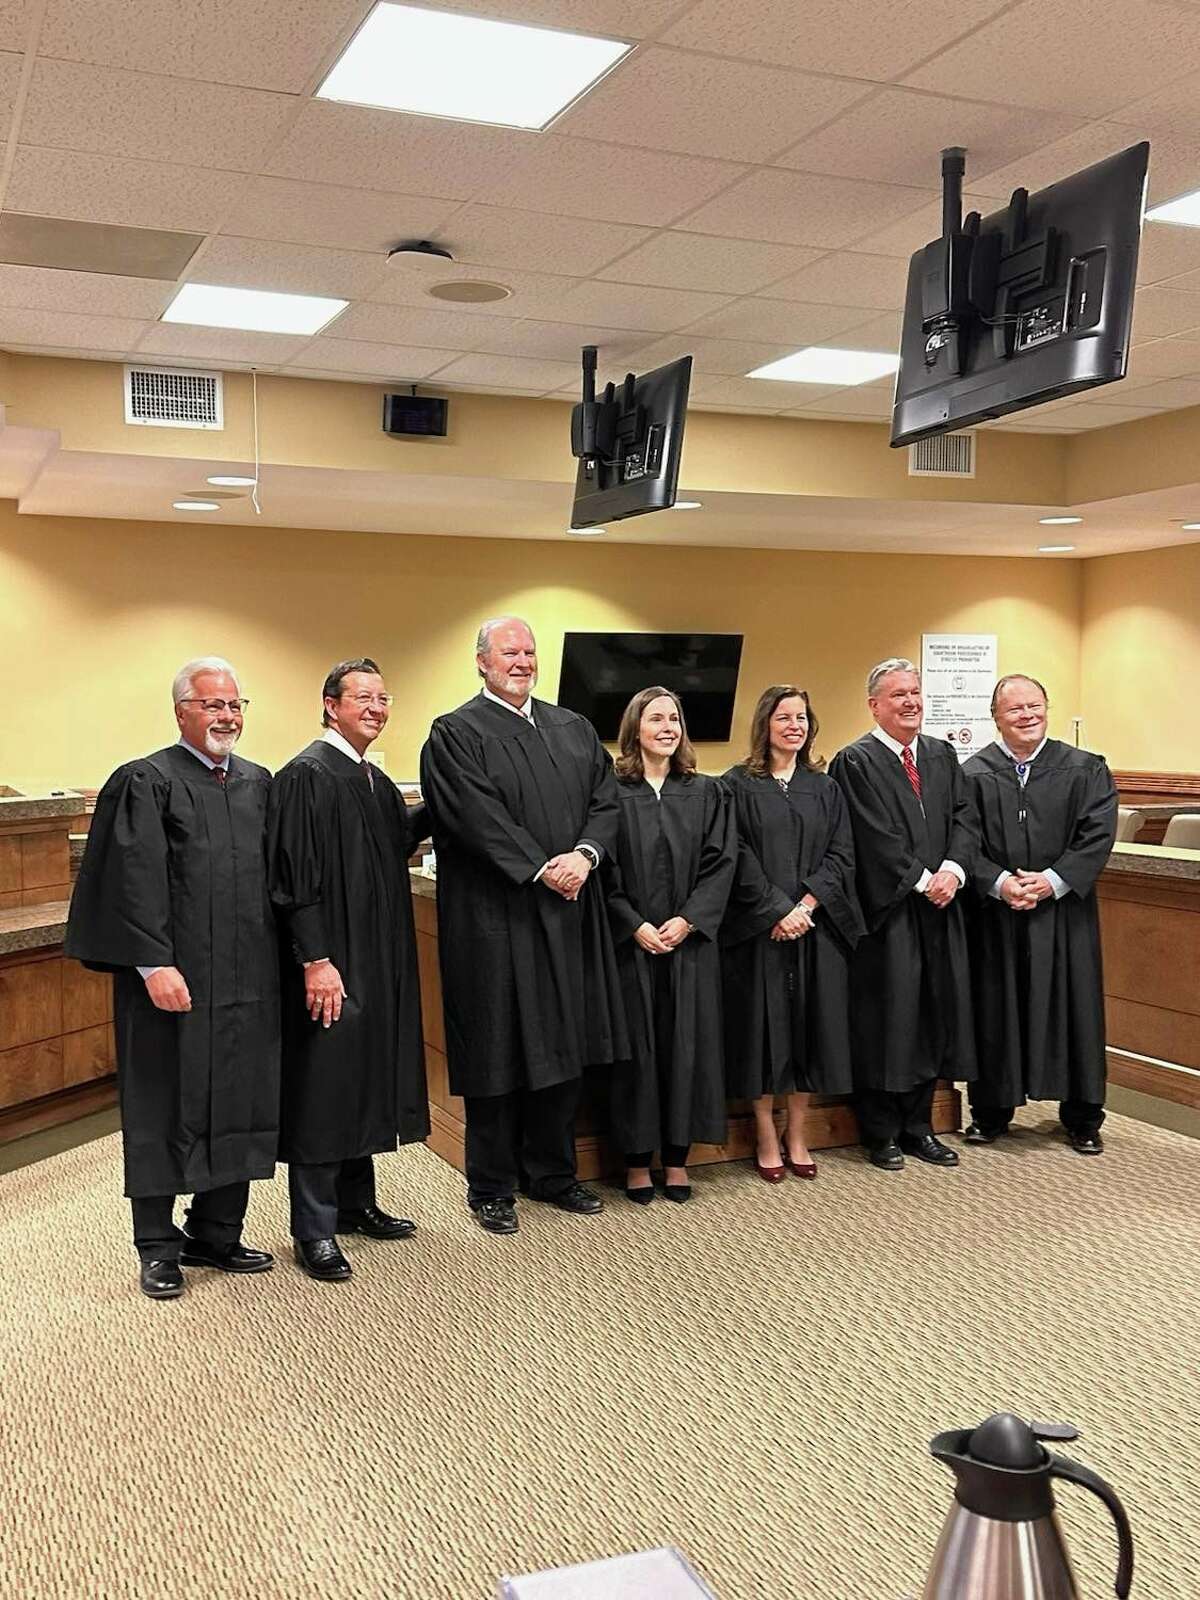 Here is a picture of the active judges in Midland – Mark Dettman, county court-at-law; David Rogers, 142nd District Court; Judge Marvin Moore, County court at-law No. 2; Leah Robertson, 385th District Court; Judge Elizabeth Byer Leonard, 238th District Court; David Lindemood, 318th District Court; Jeff Robnett, 441st District Court. 